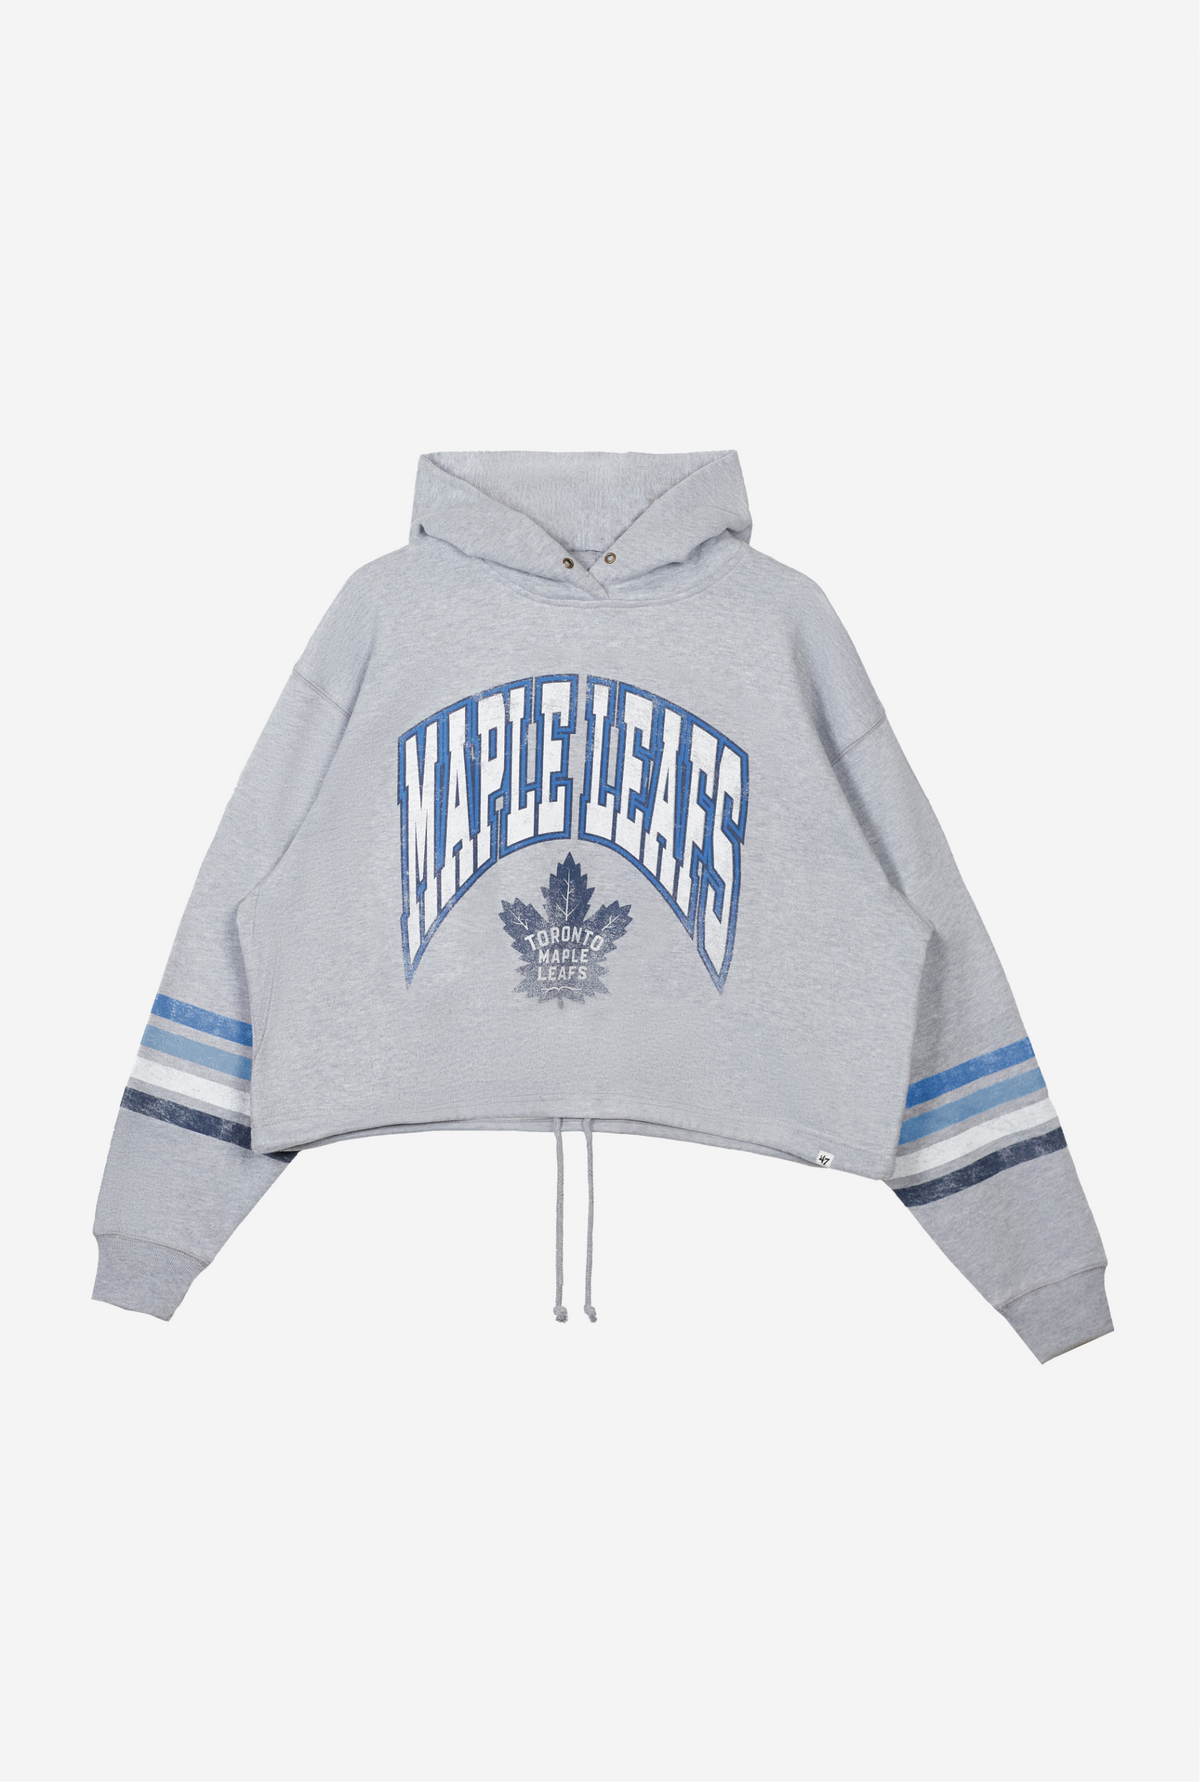 Toronto Maple Leafs Upland Bennet Cropped Hoodie